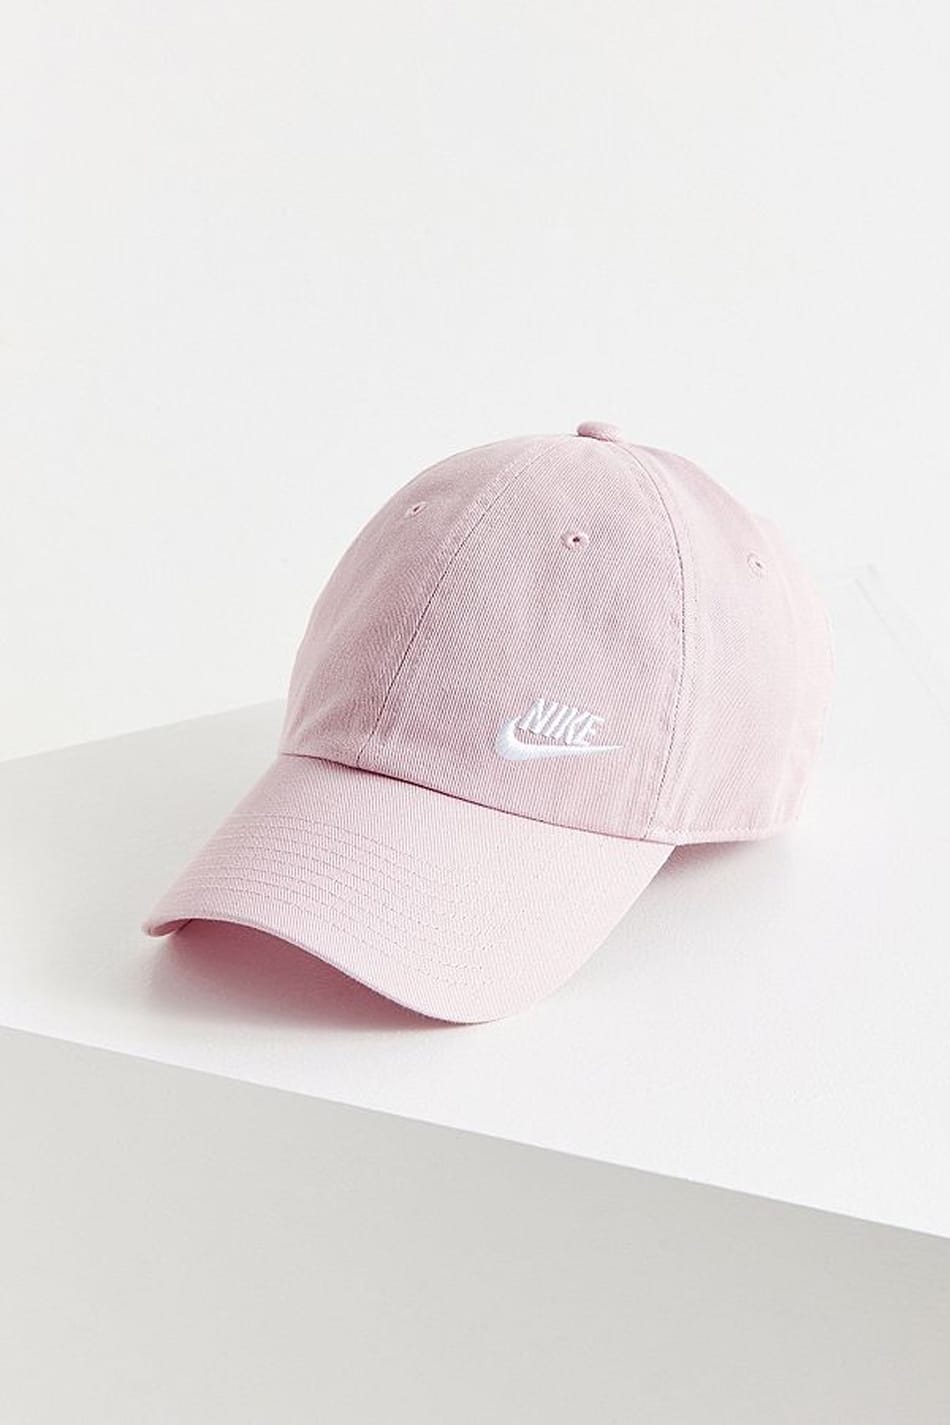 pink and white nike hat